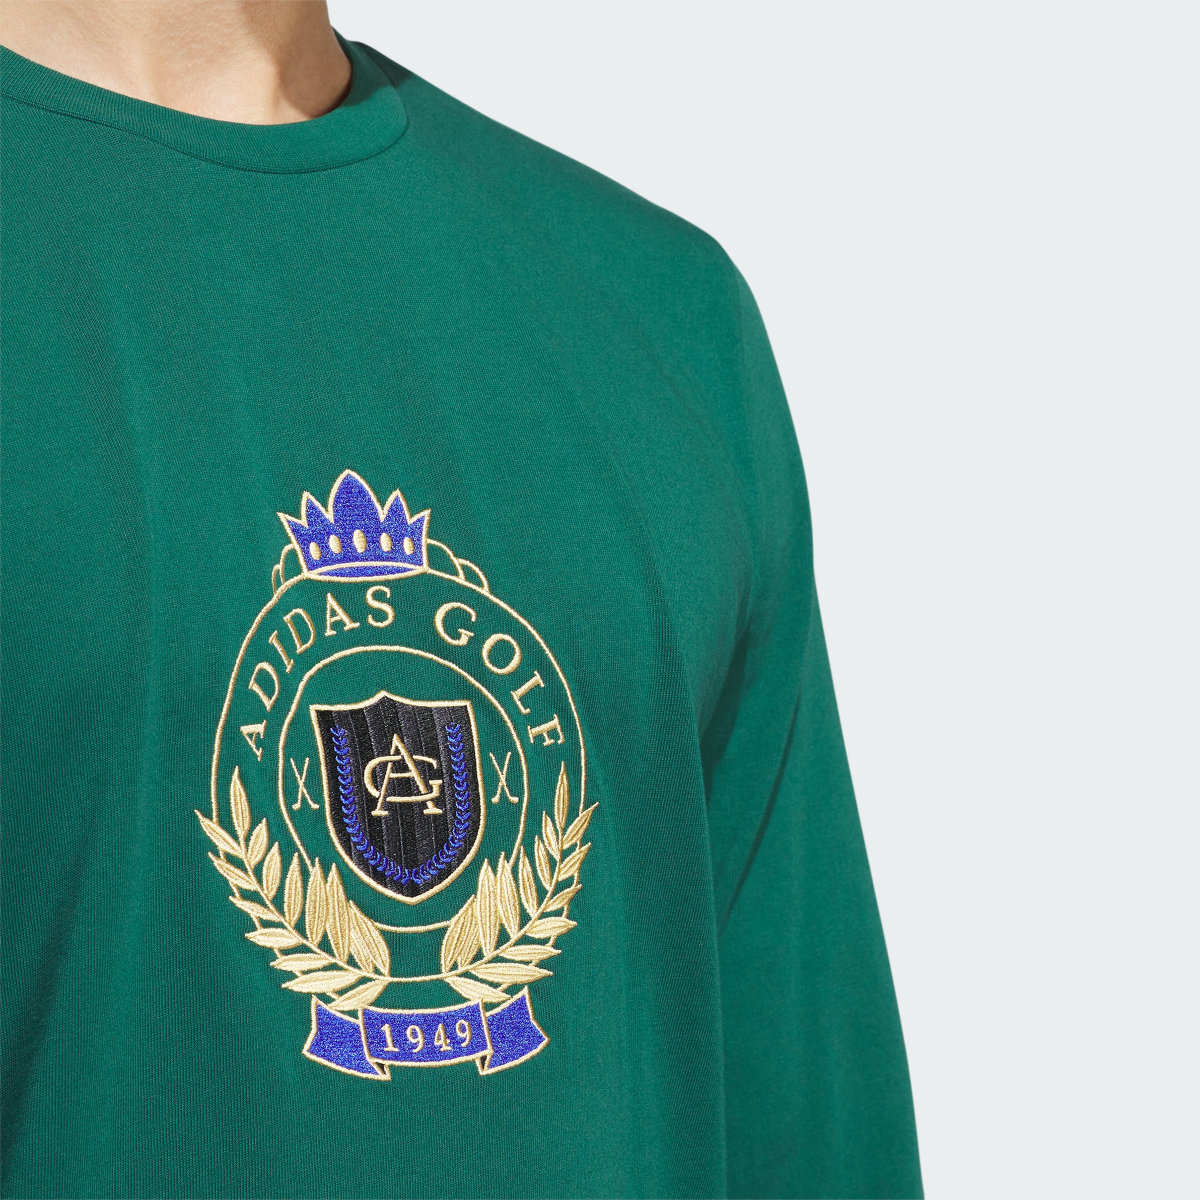 Adidas Go-To Crest Graphic Long Sleeve T-Shirt. 9